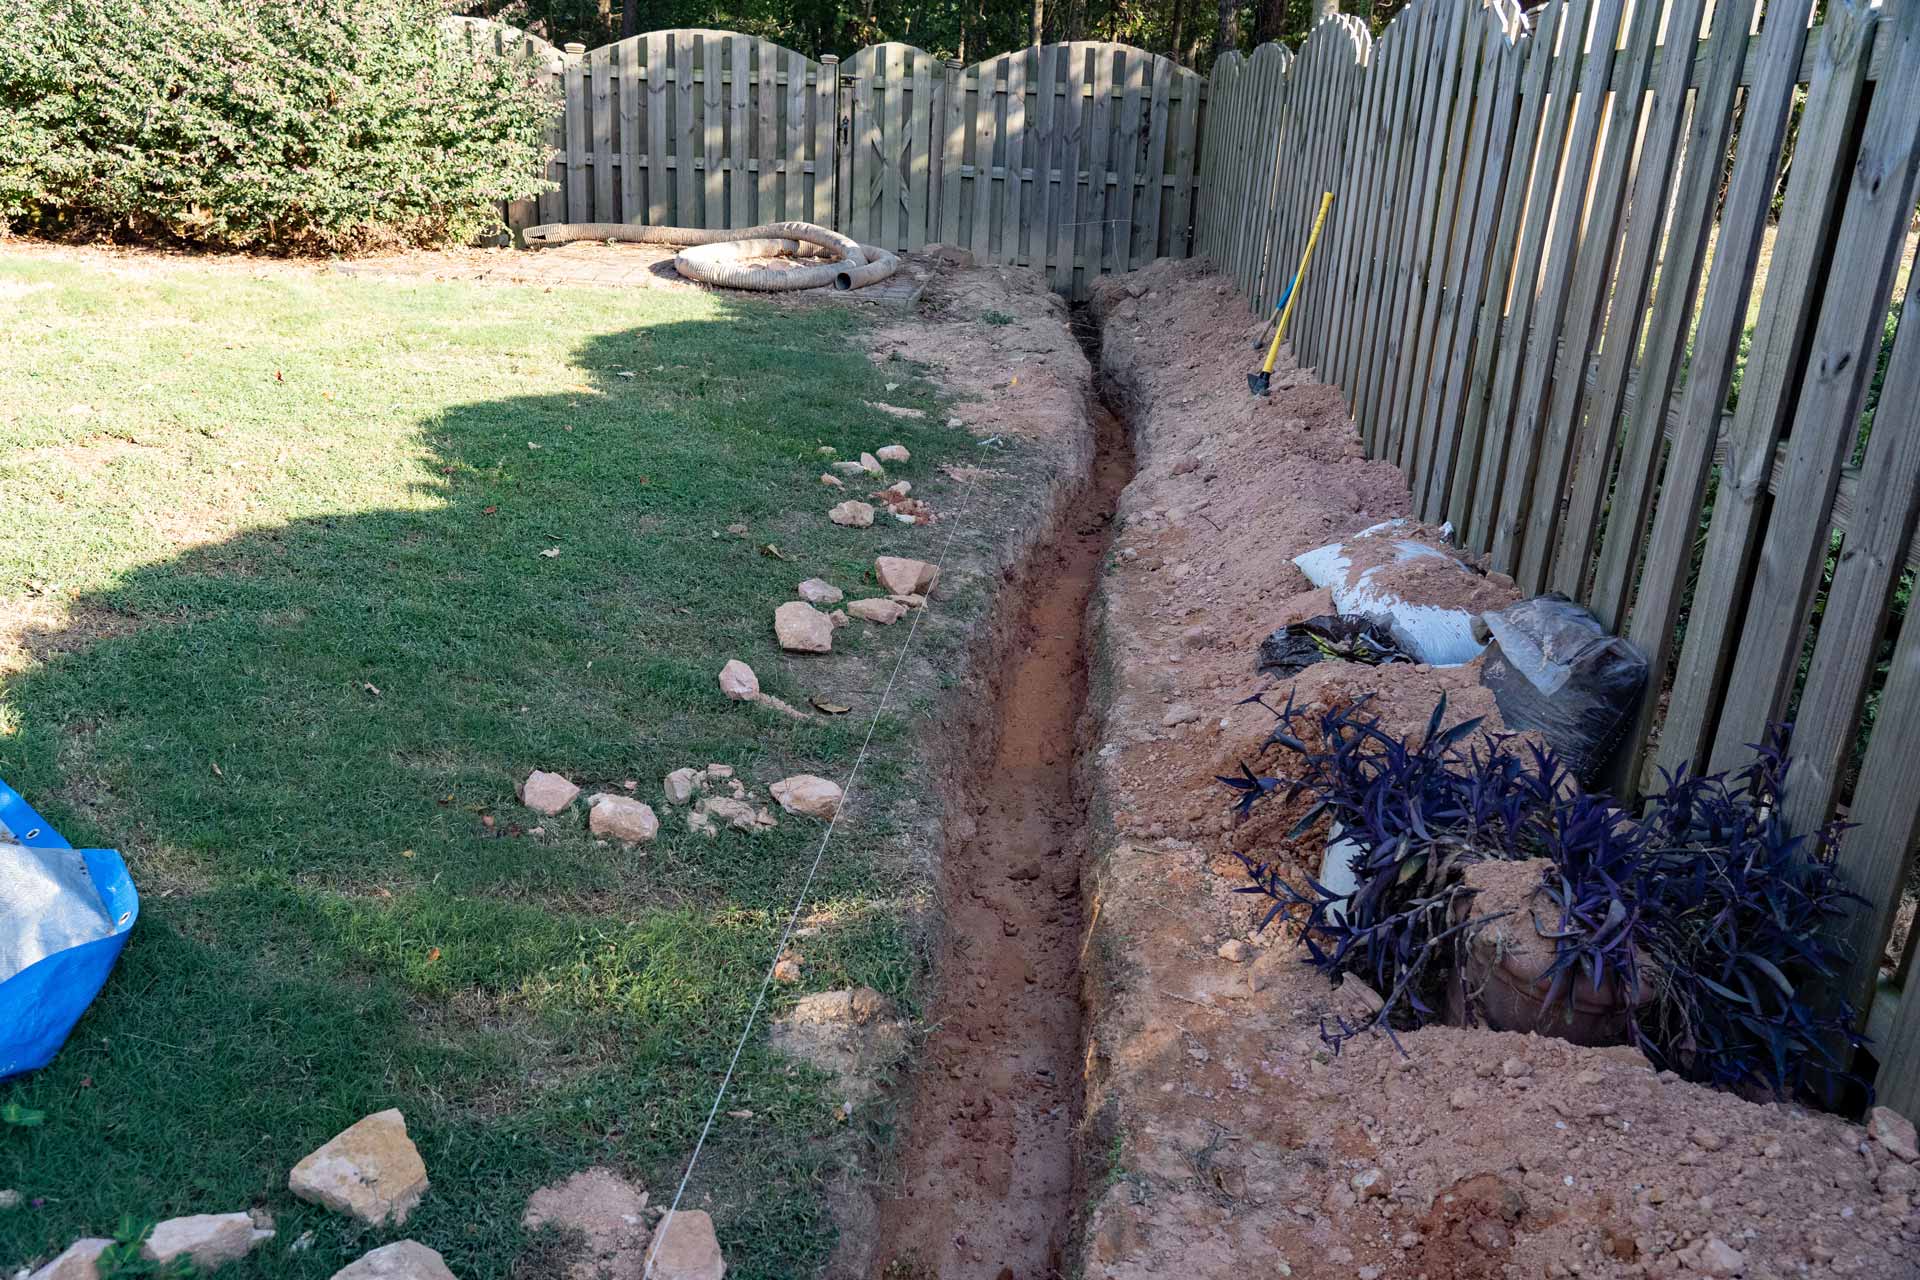 In-progress trench digging for French drain installation